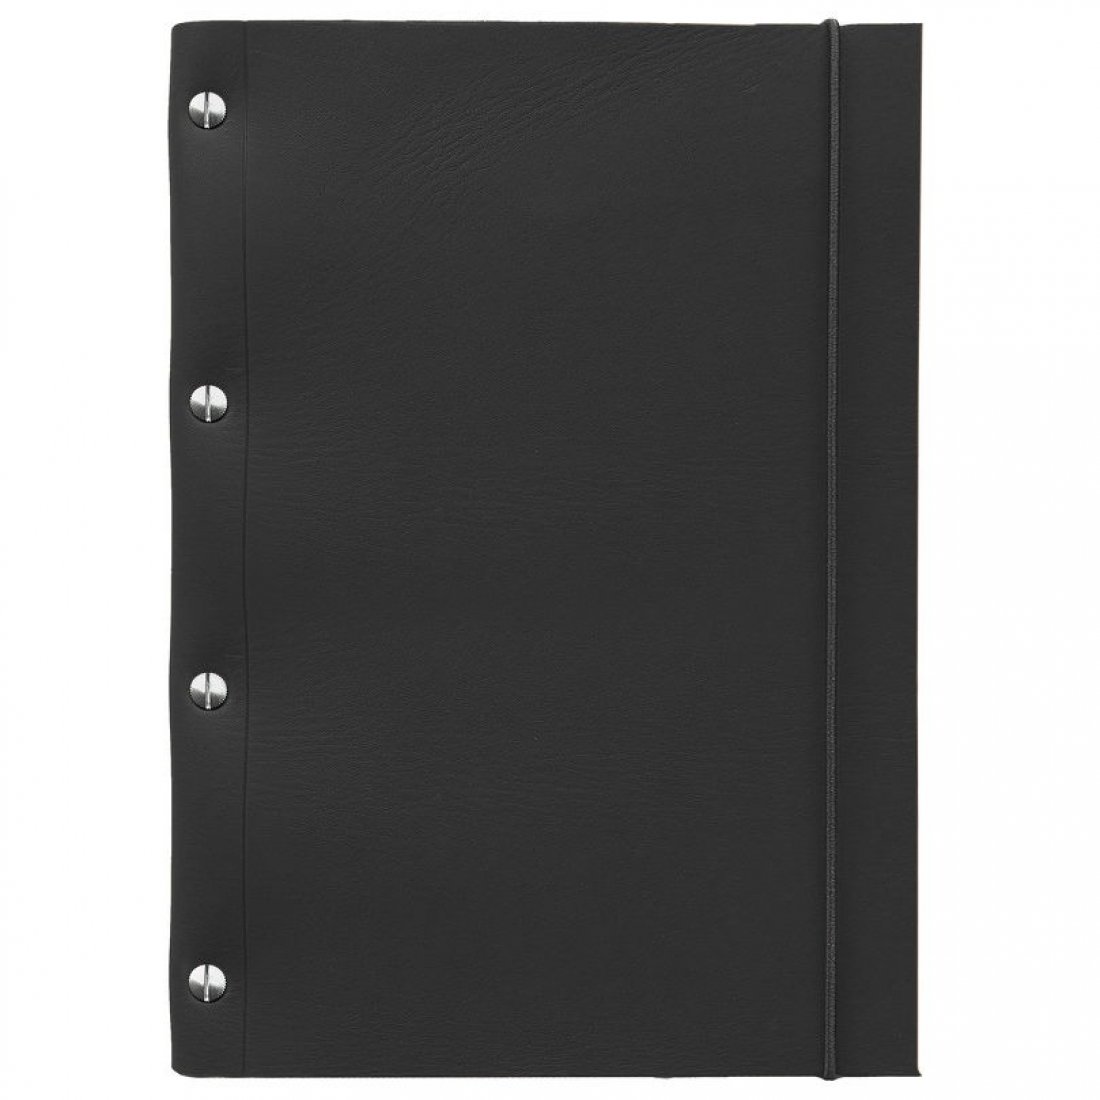 A4 Leather Notebook - Robusto